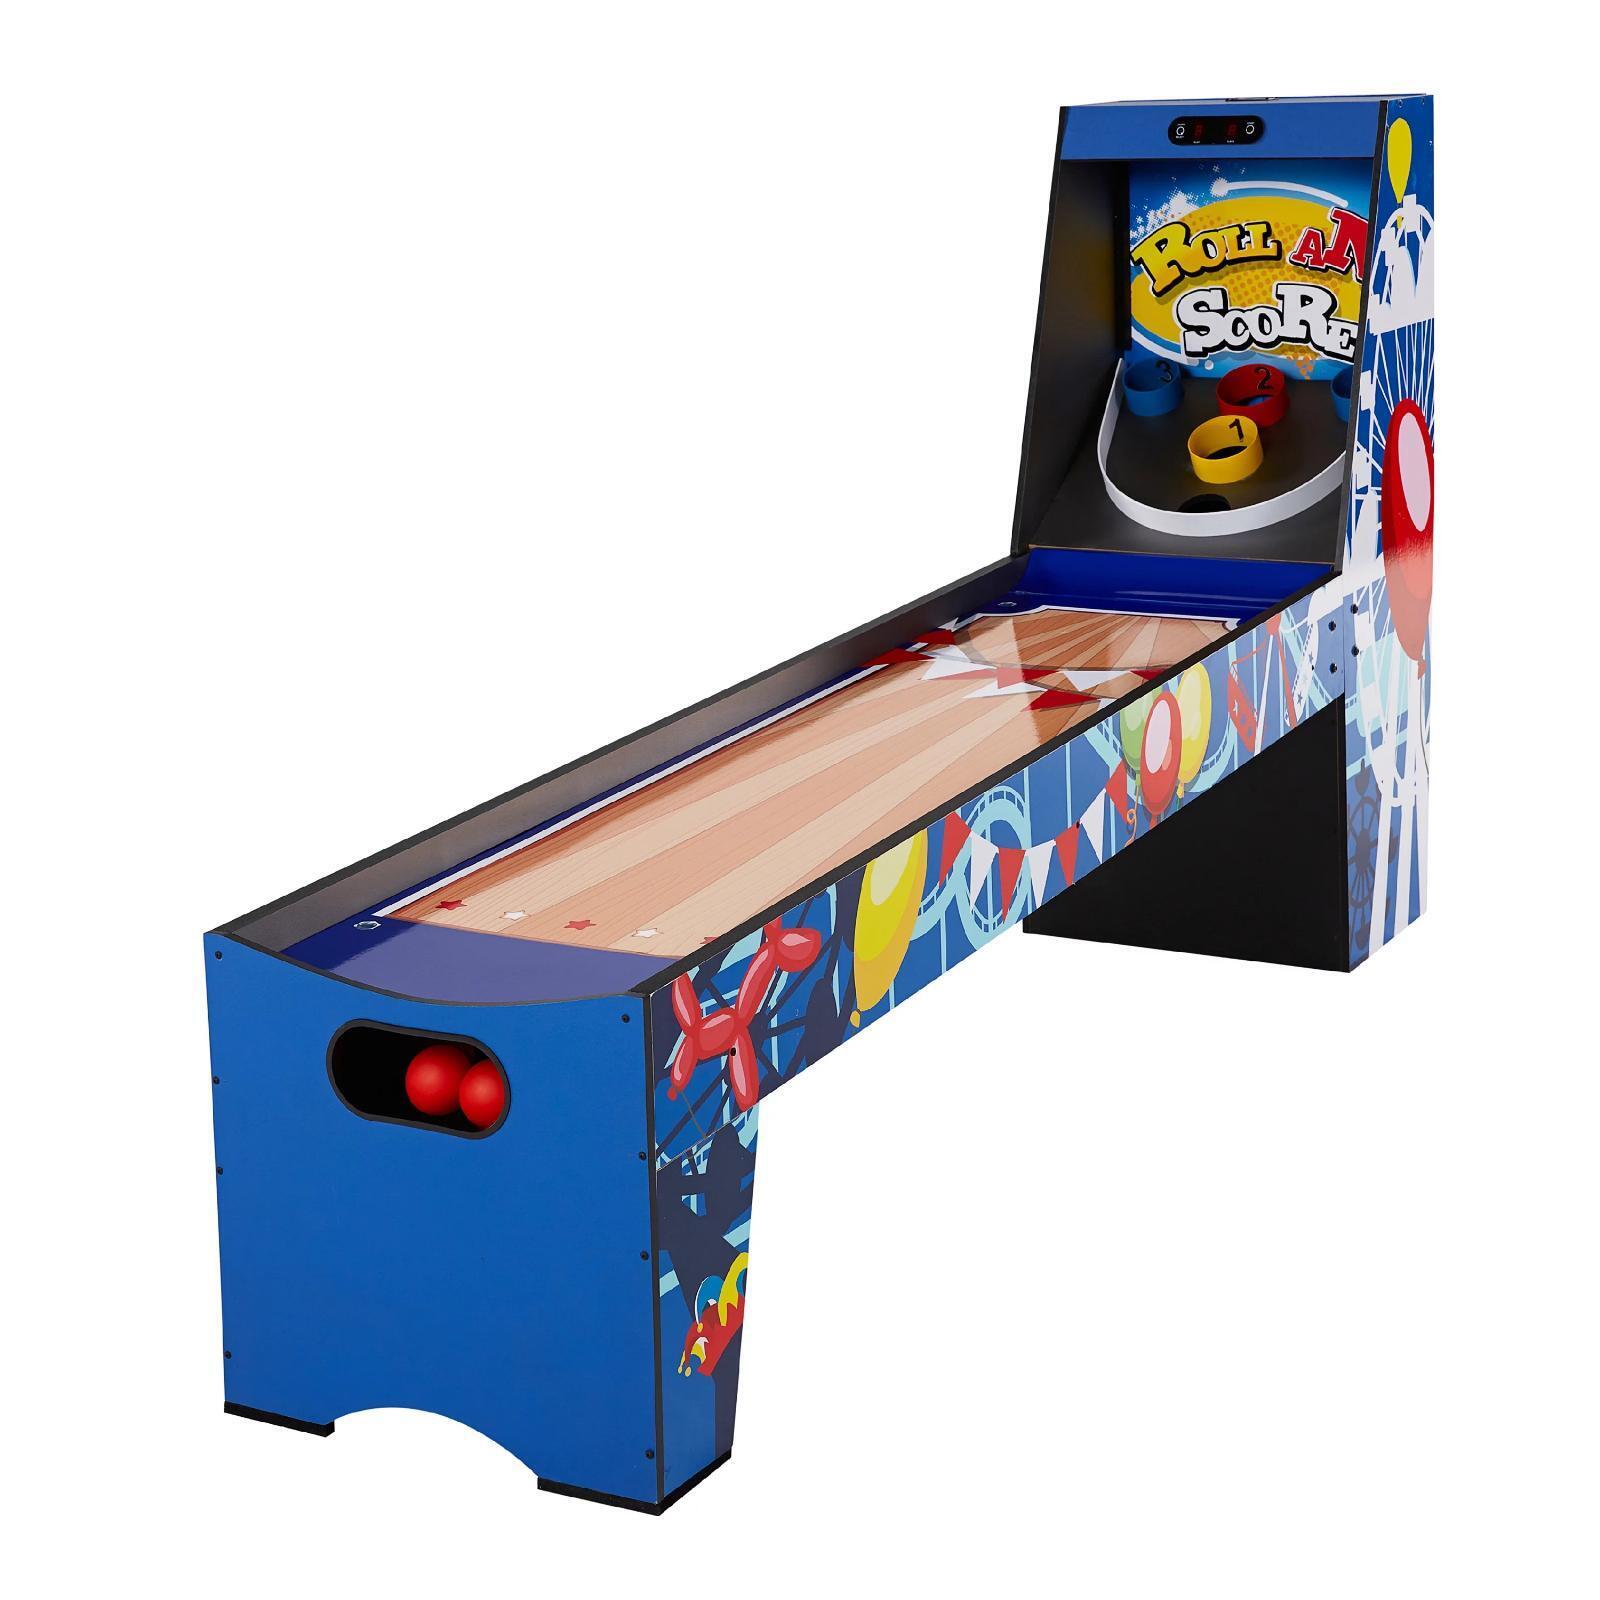 7’3” MD Sports Roll And Score Game W/ Electronic Scorer Realistic Arcade Sounds